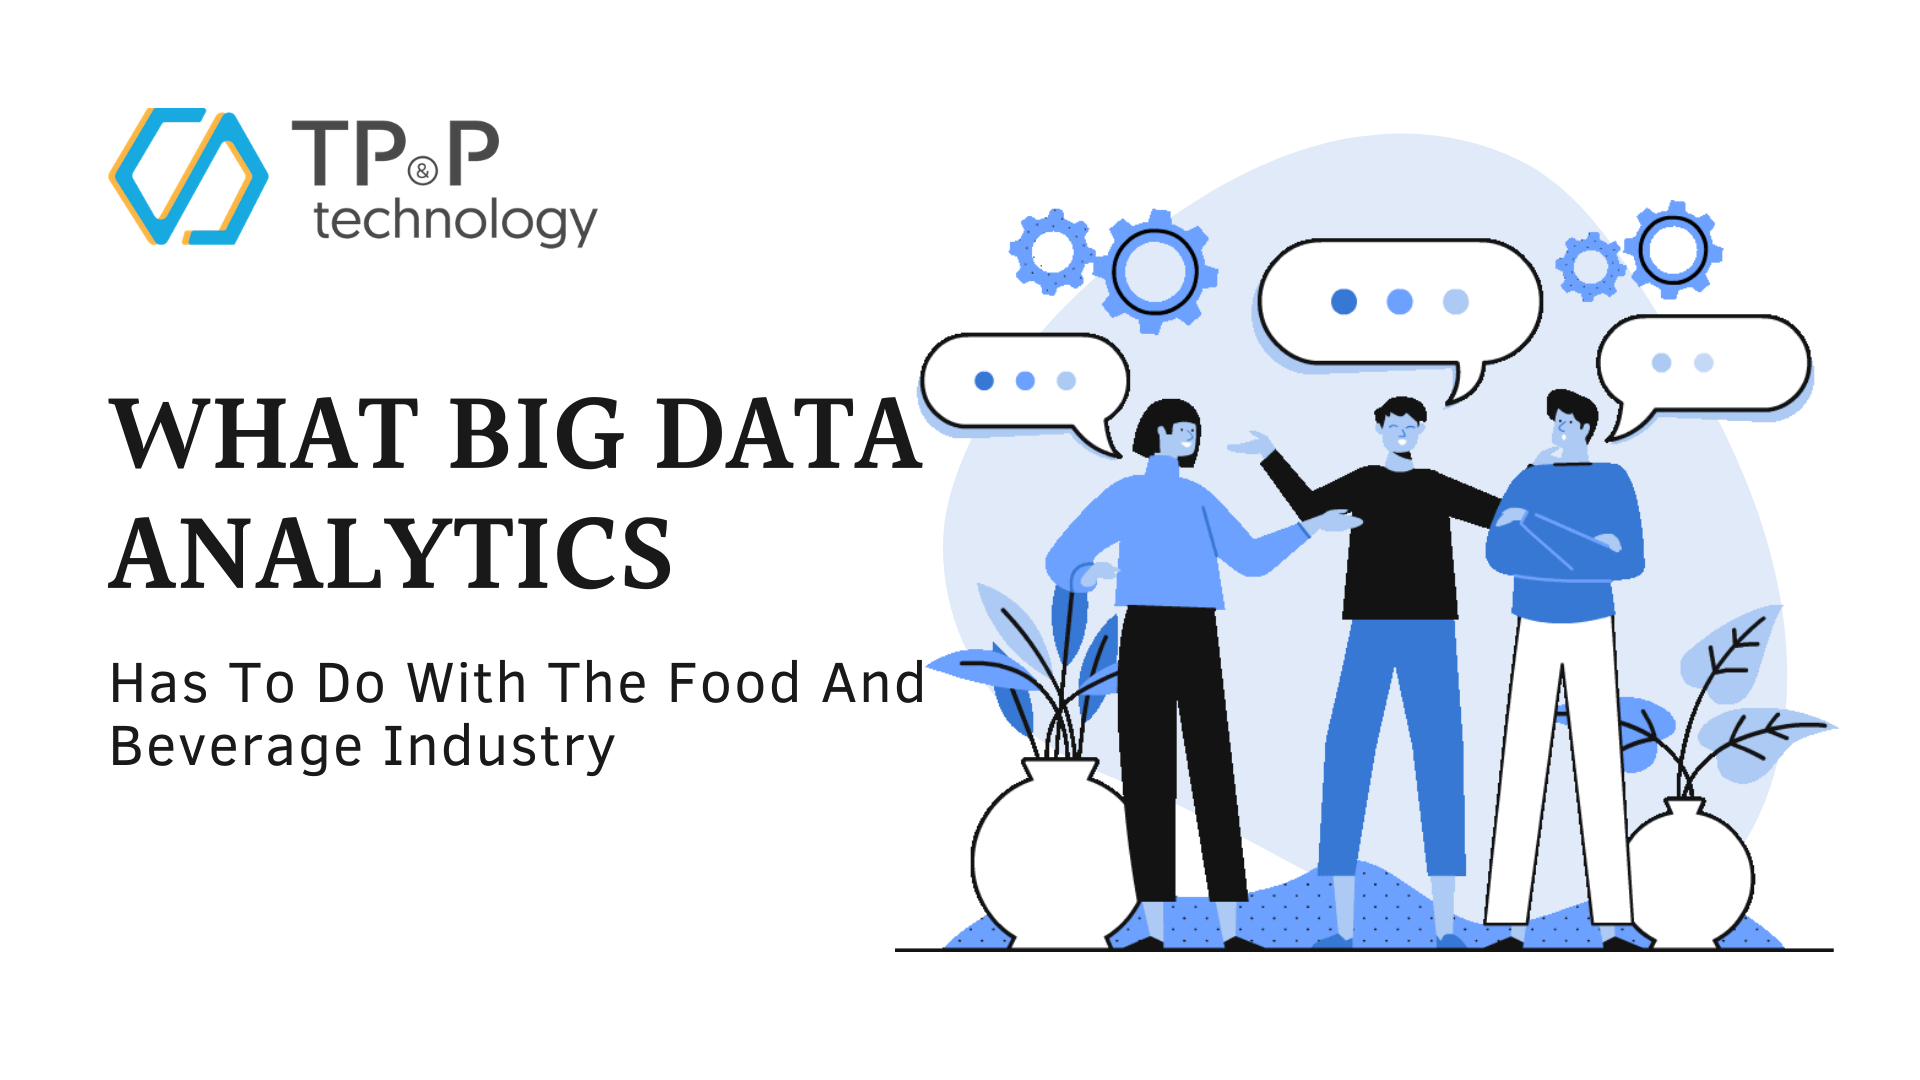 What Big Data Analytics Has To Do With The Food And Beverage Industry